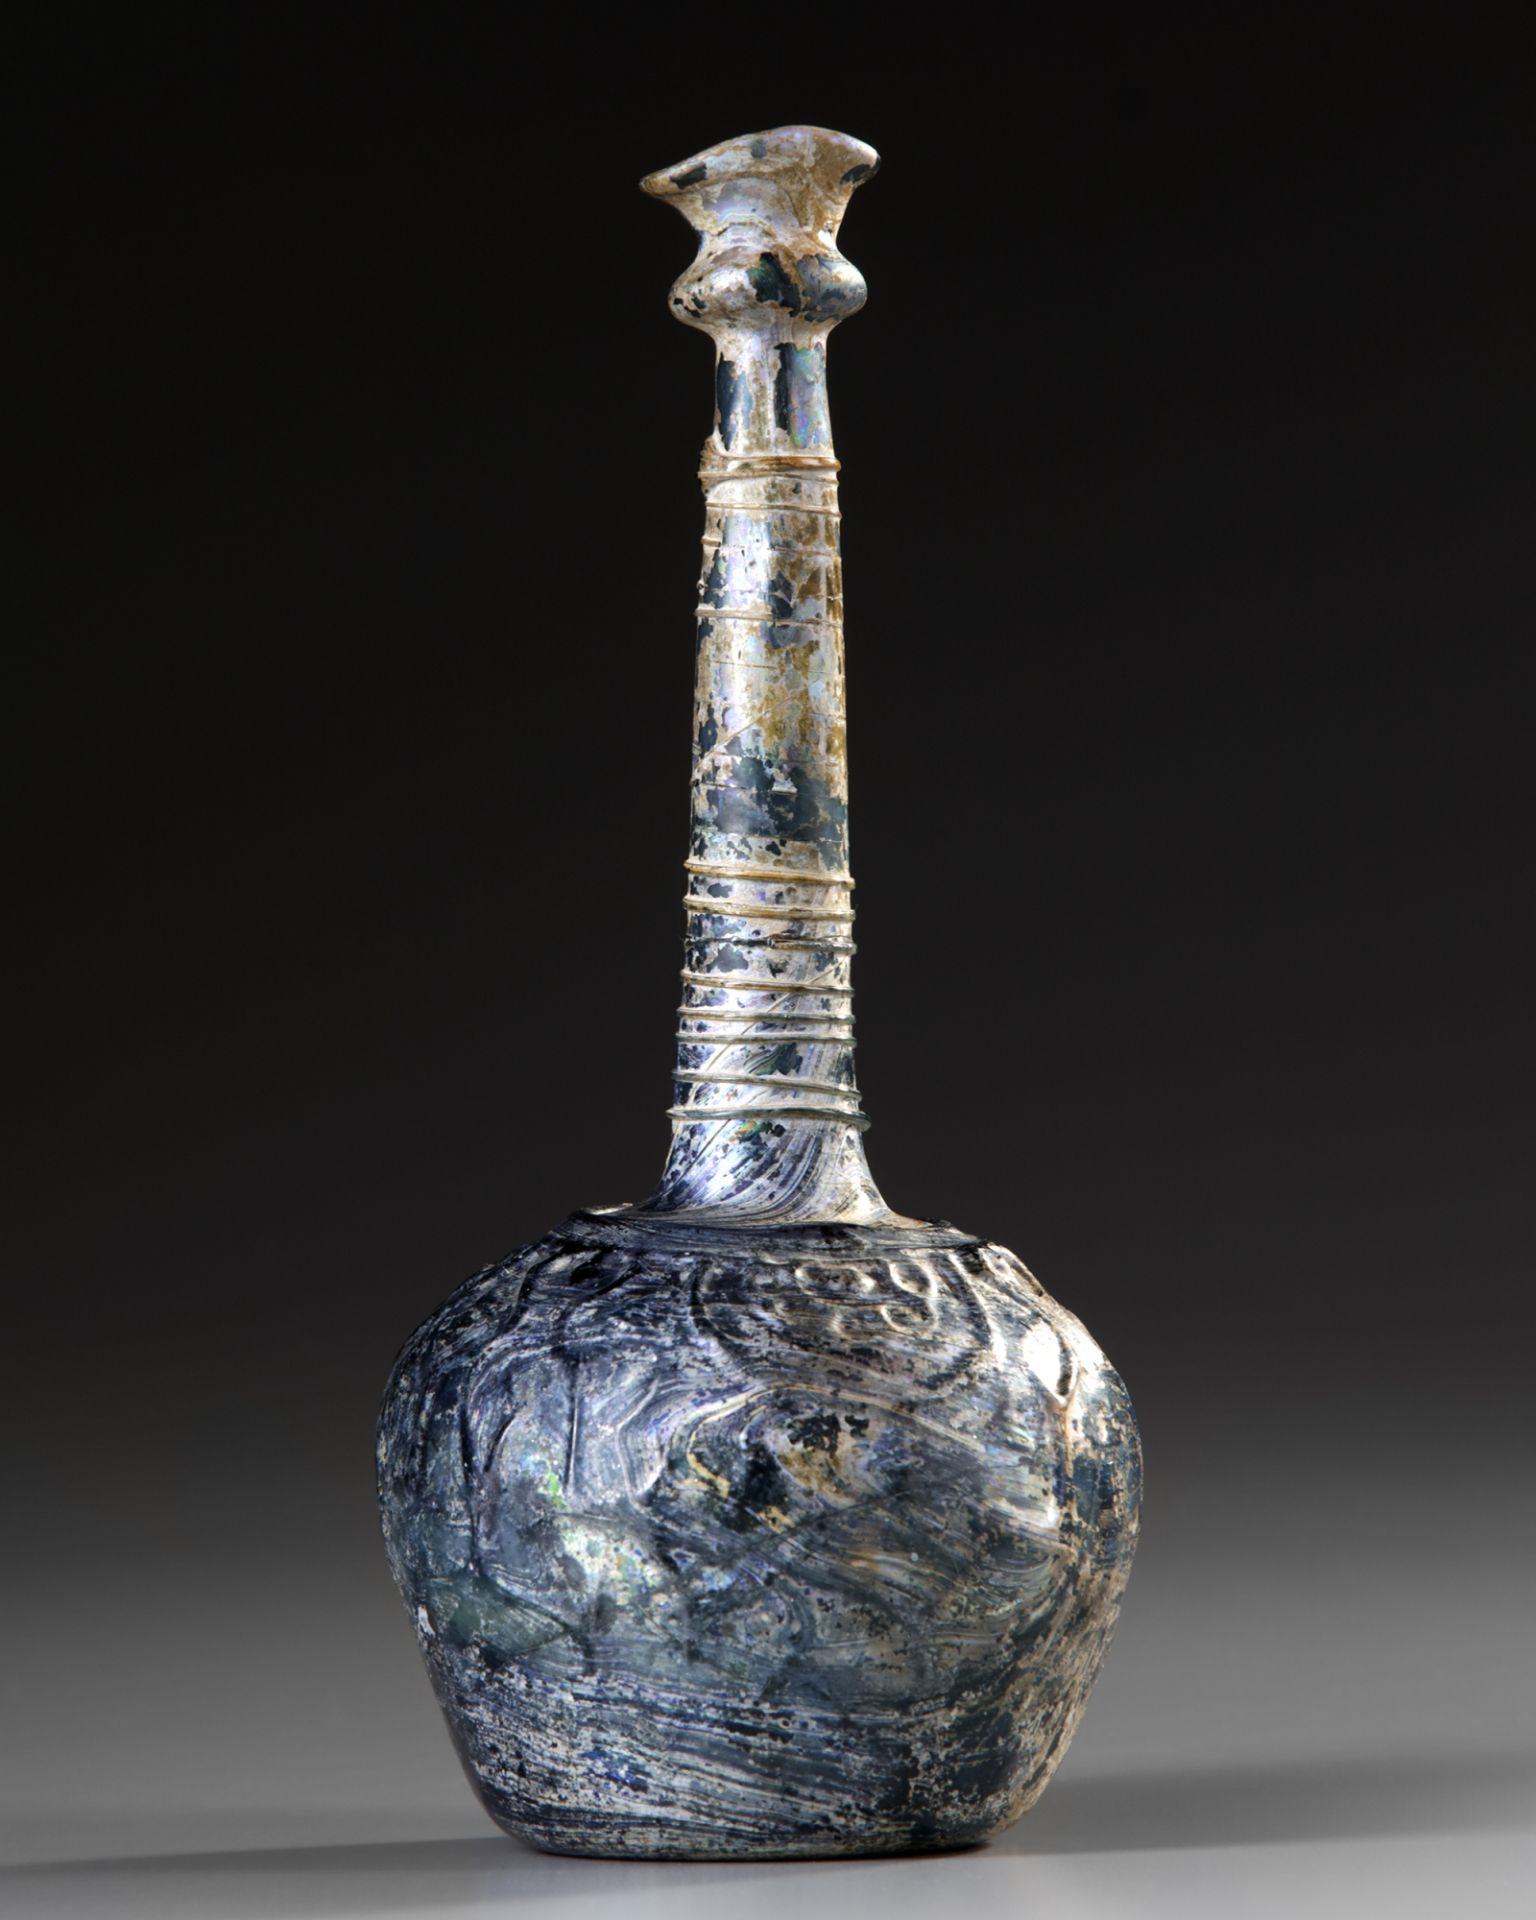 A TALL-NECKED BLUE GLASS BOTTLE, PERSIA OR SYRIA, 11TH-12TH CENTURY - Image 2 of 7